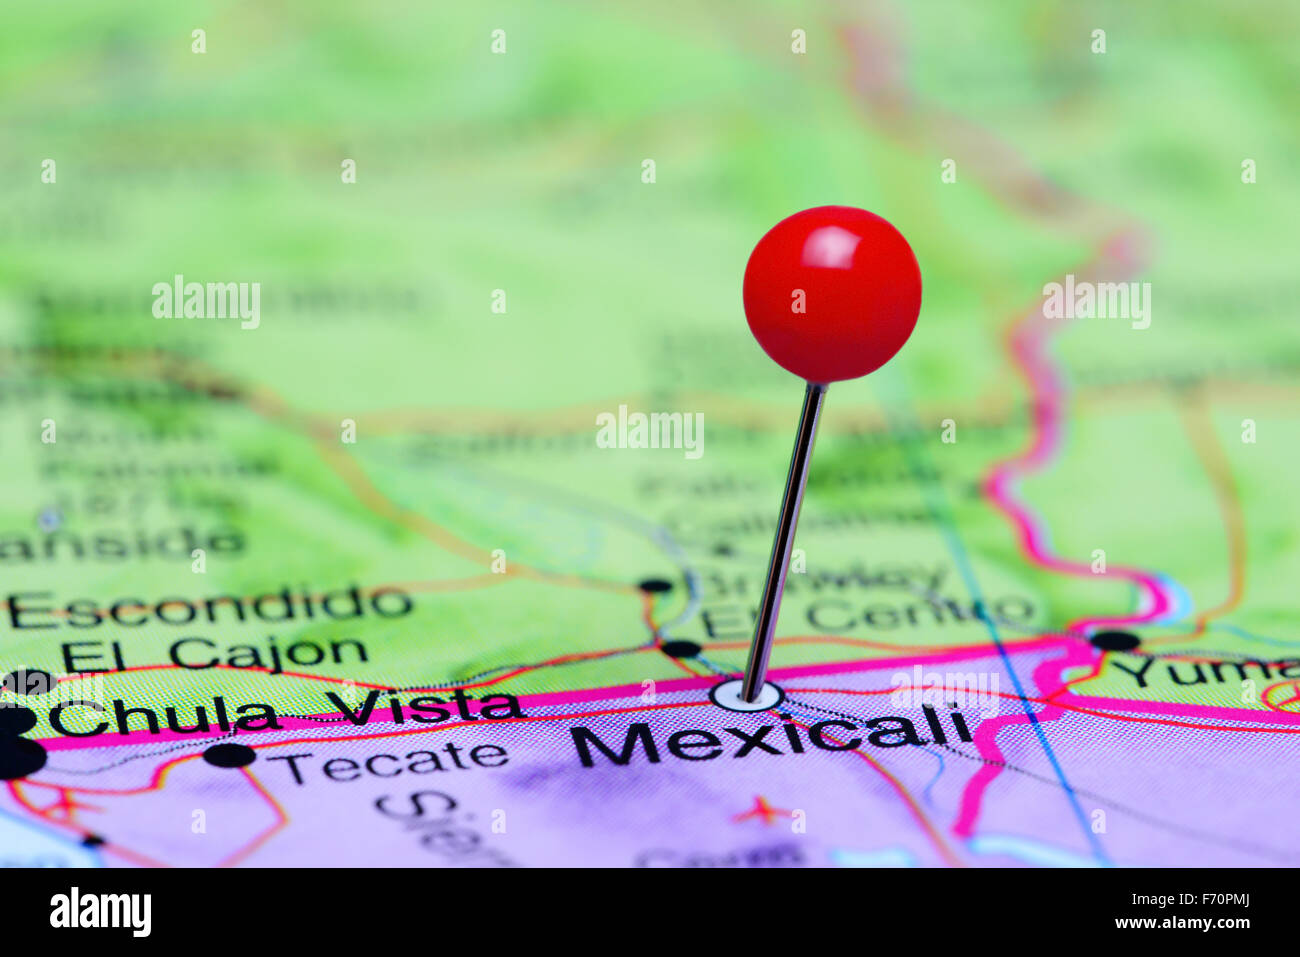 Mexicali pinned on a map of Mexico Stock Photo